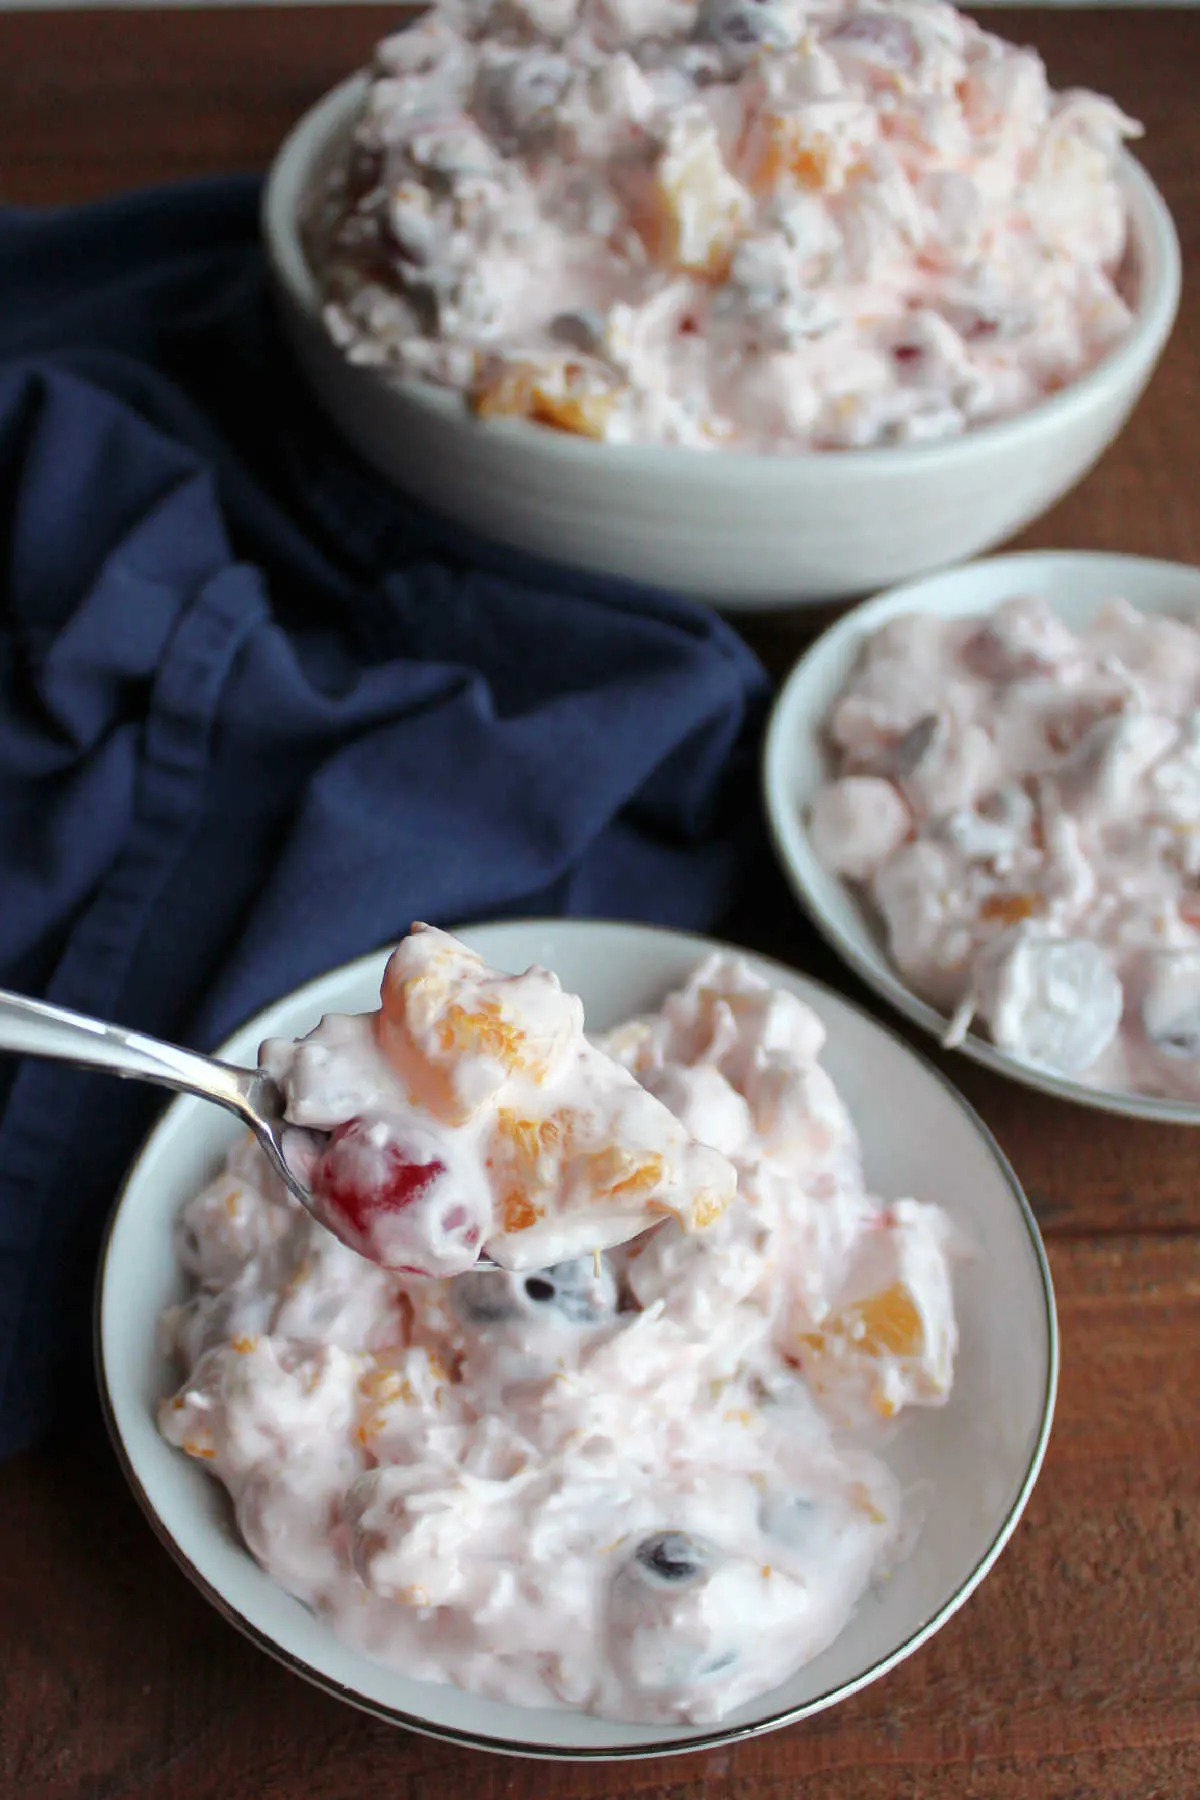 Spoonful of ambrosia fruit salad with orange section, pineapple and cherries in a sweet pink dressing ready to eat. 